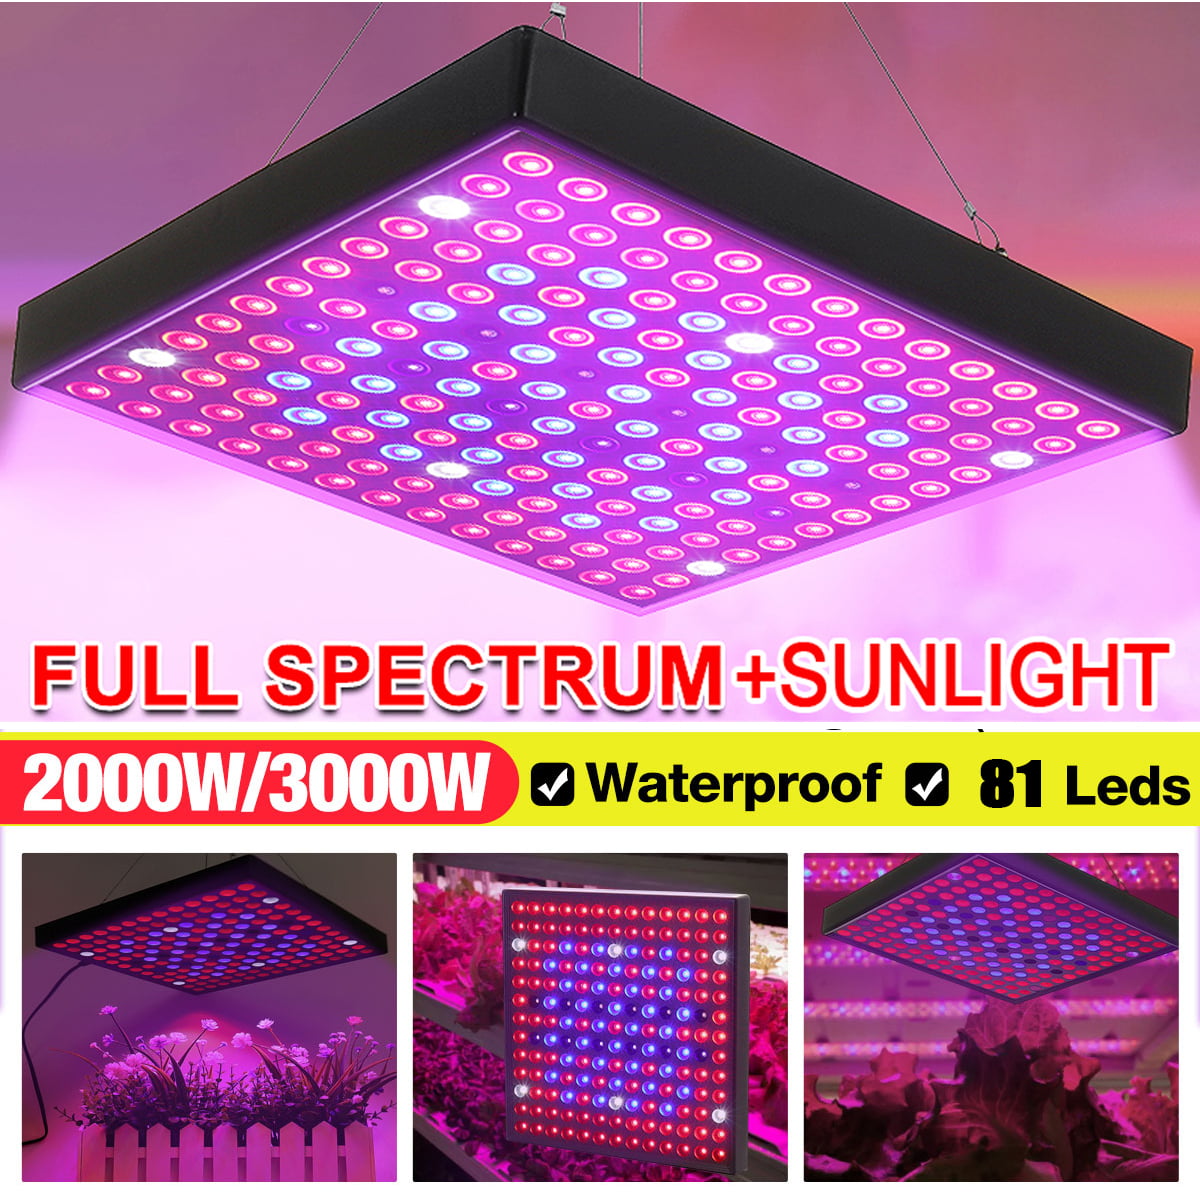 LED Grow Light Full Spectrum Growth Lamp Adjustable for Indoor Hydroponics Plant 